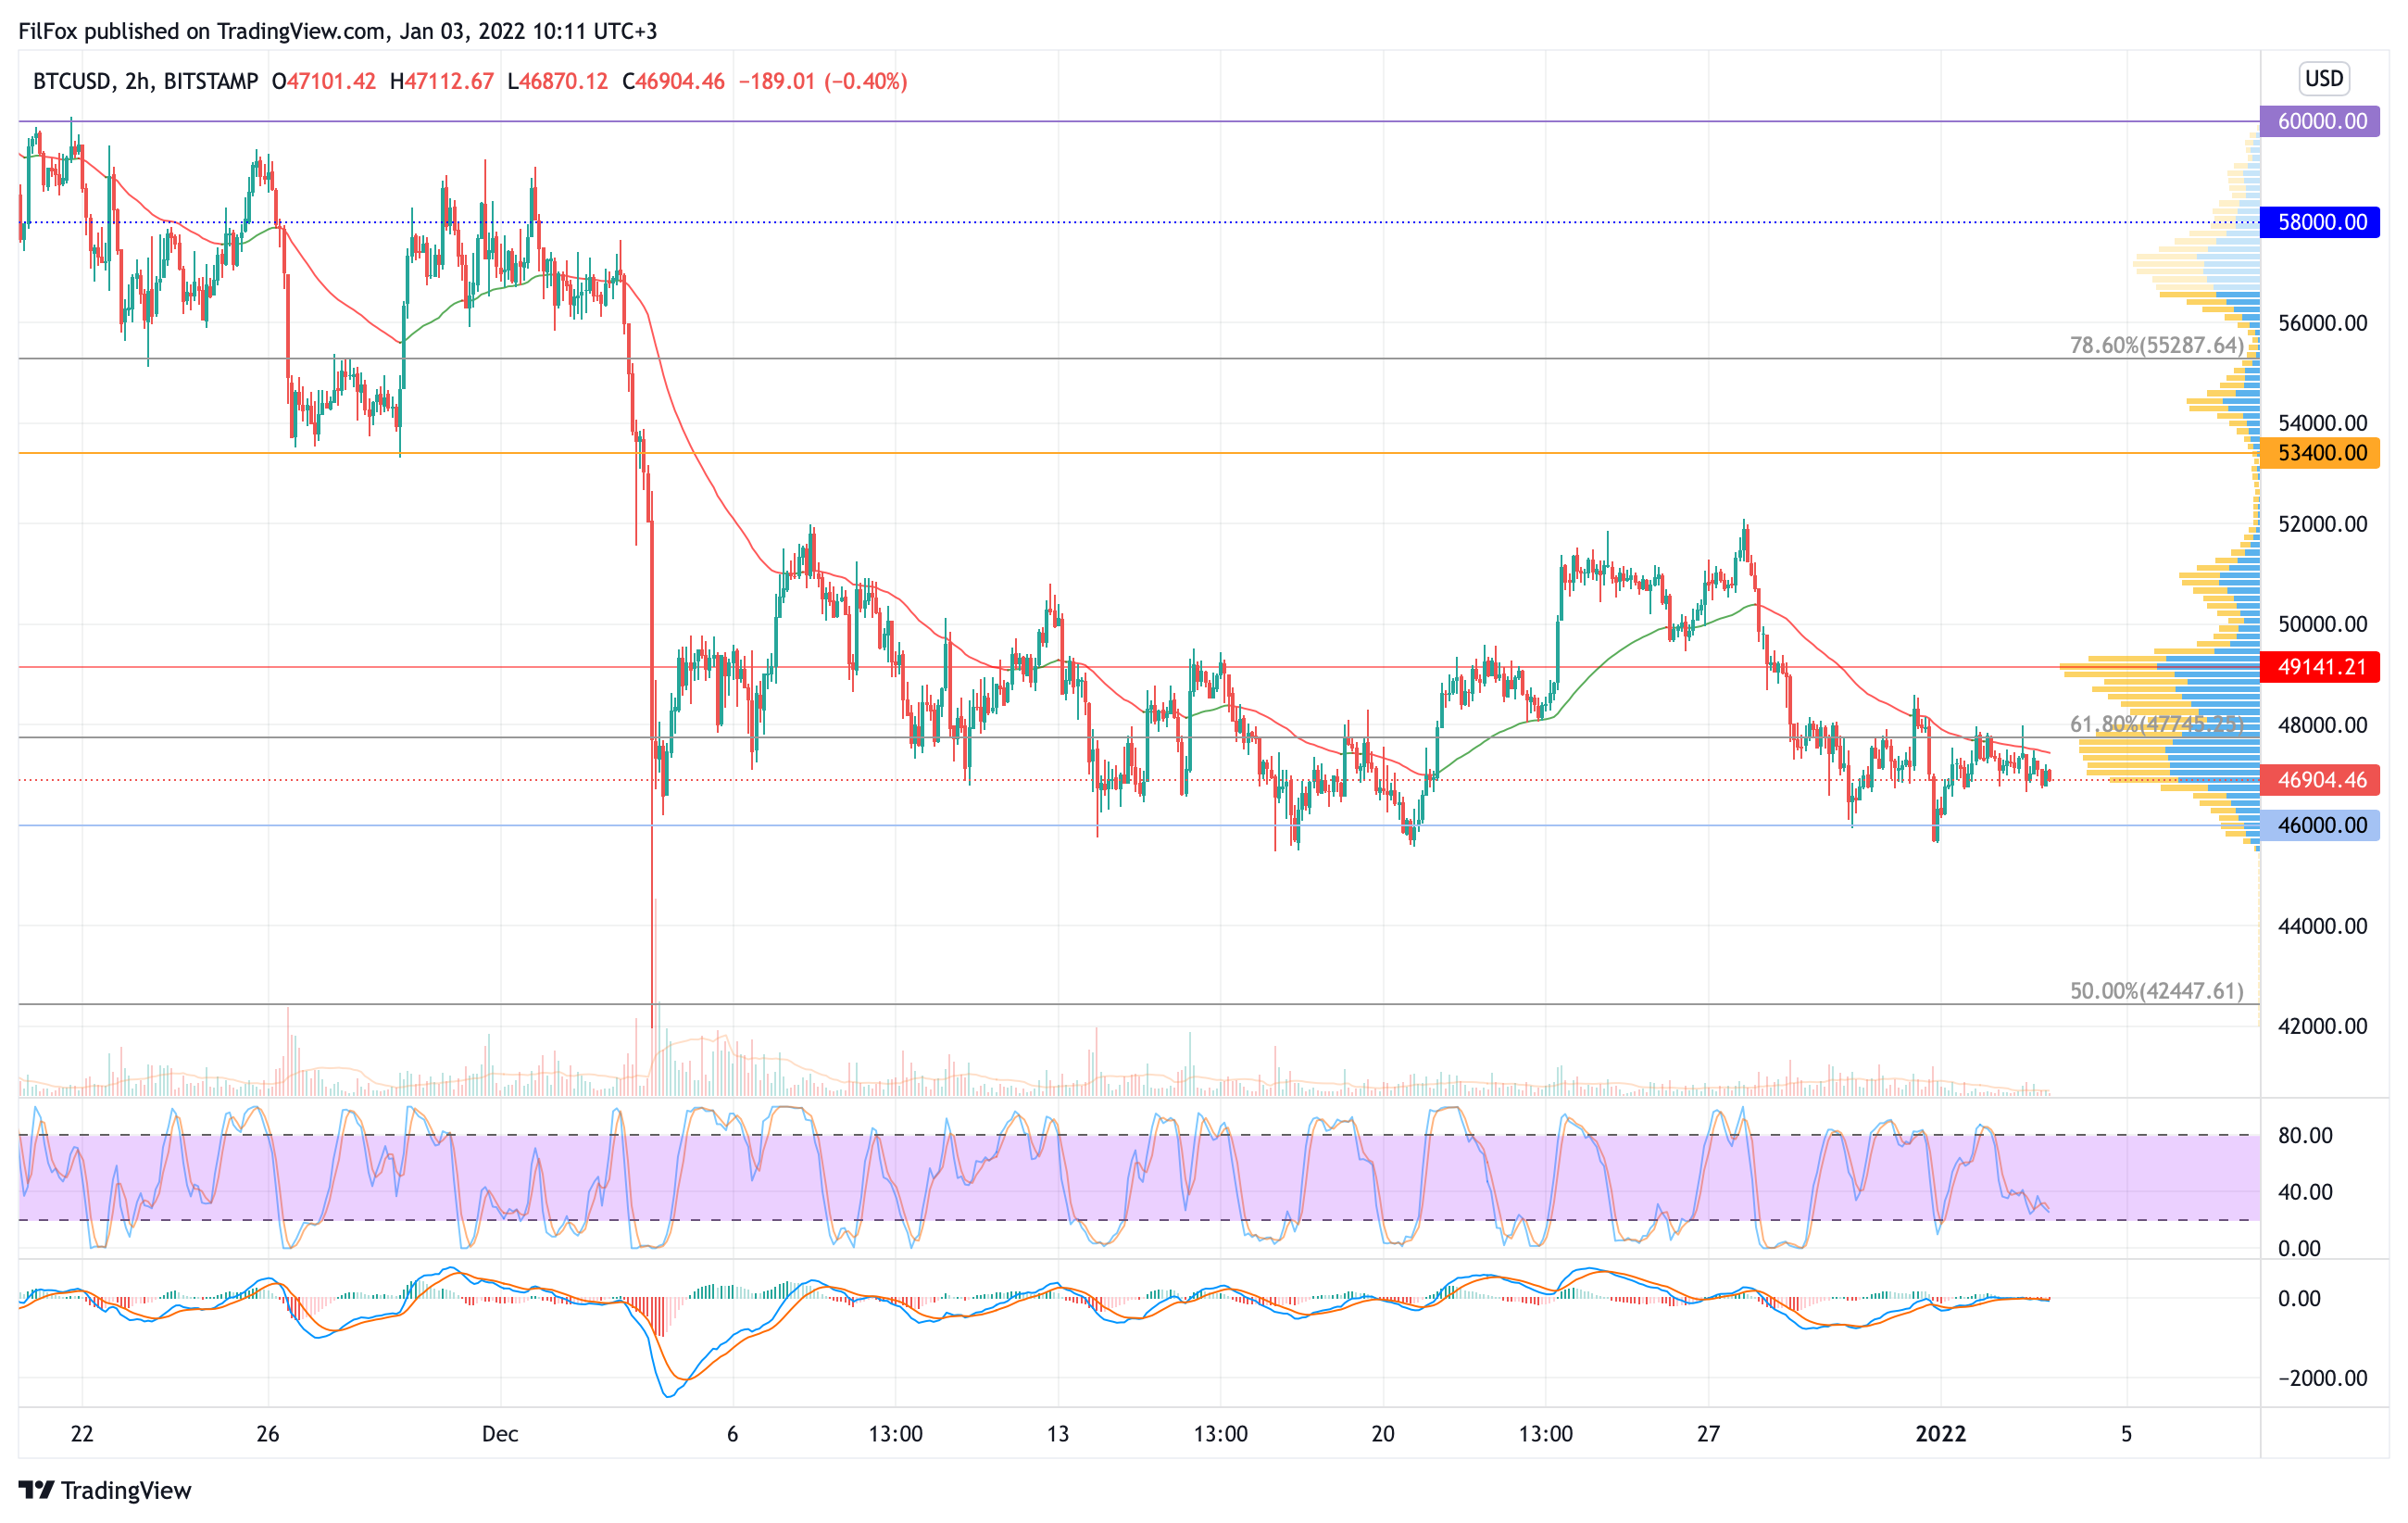 Analysis of the prices of Bitcoin, Ethereum, XRP for 01/03/2022